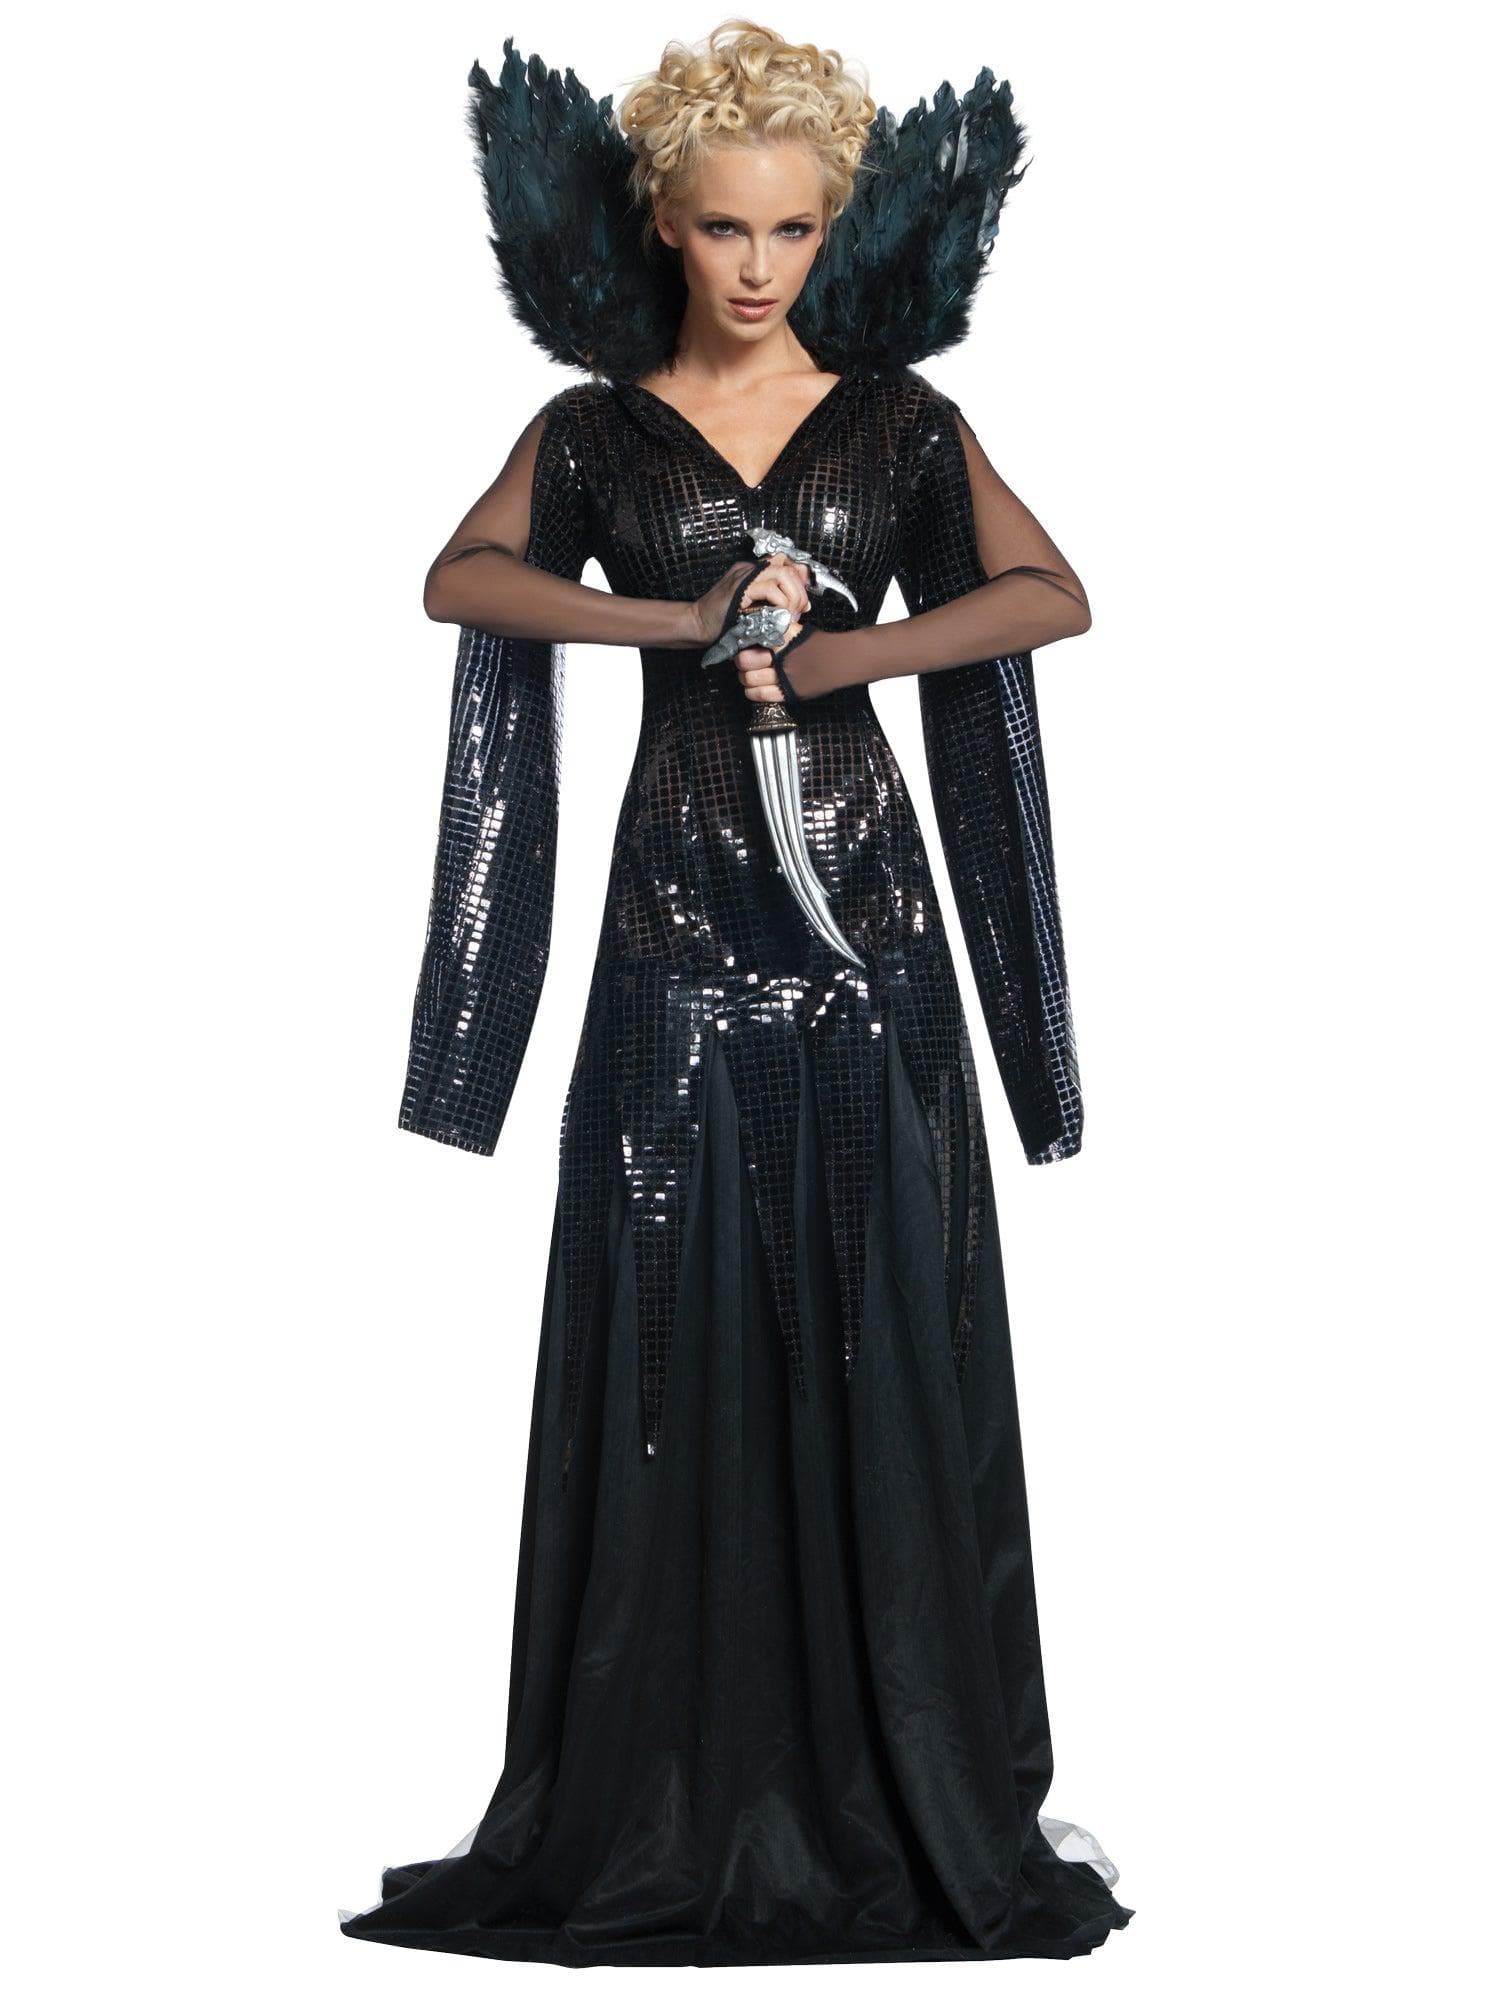 Women's Snow White and the Huntsman Queen Ravenna Costume - Deluxe - costumes.com